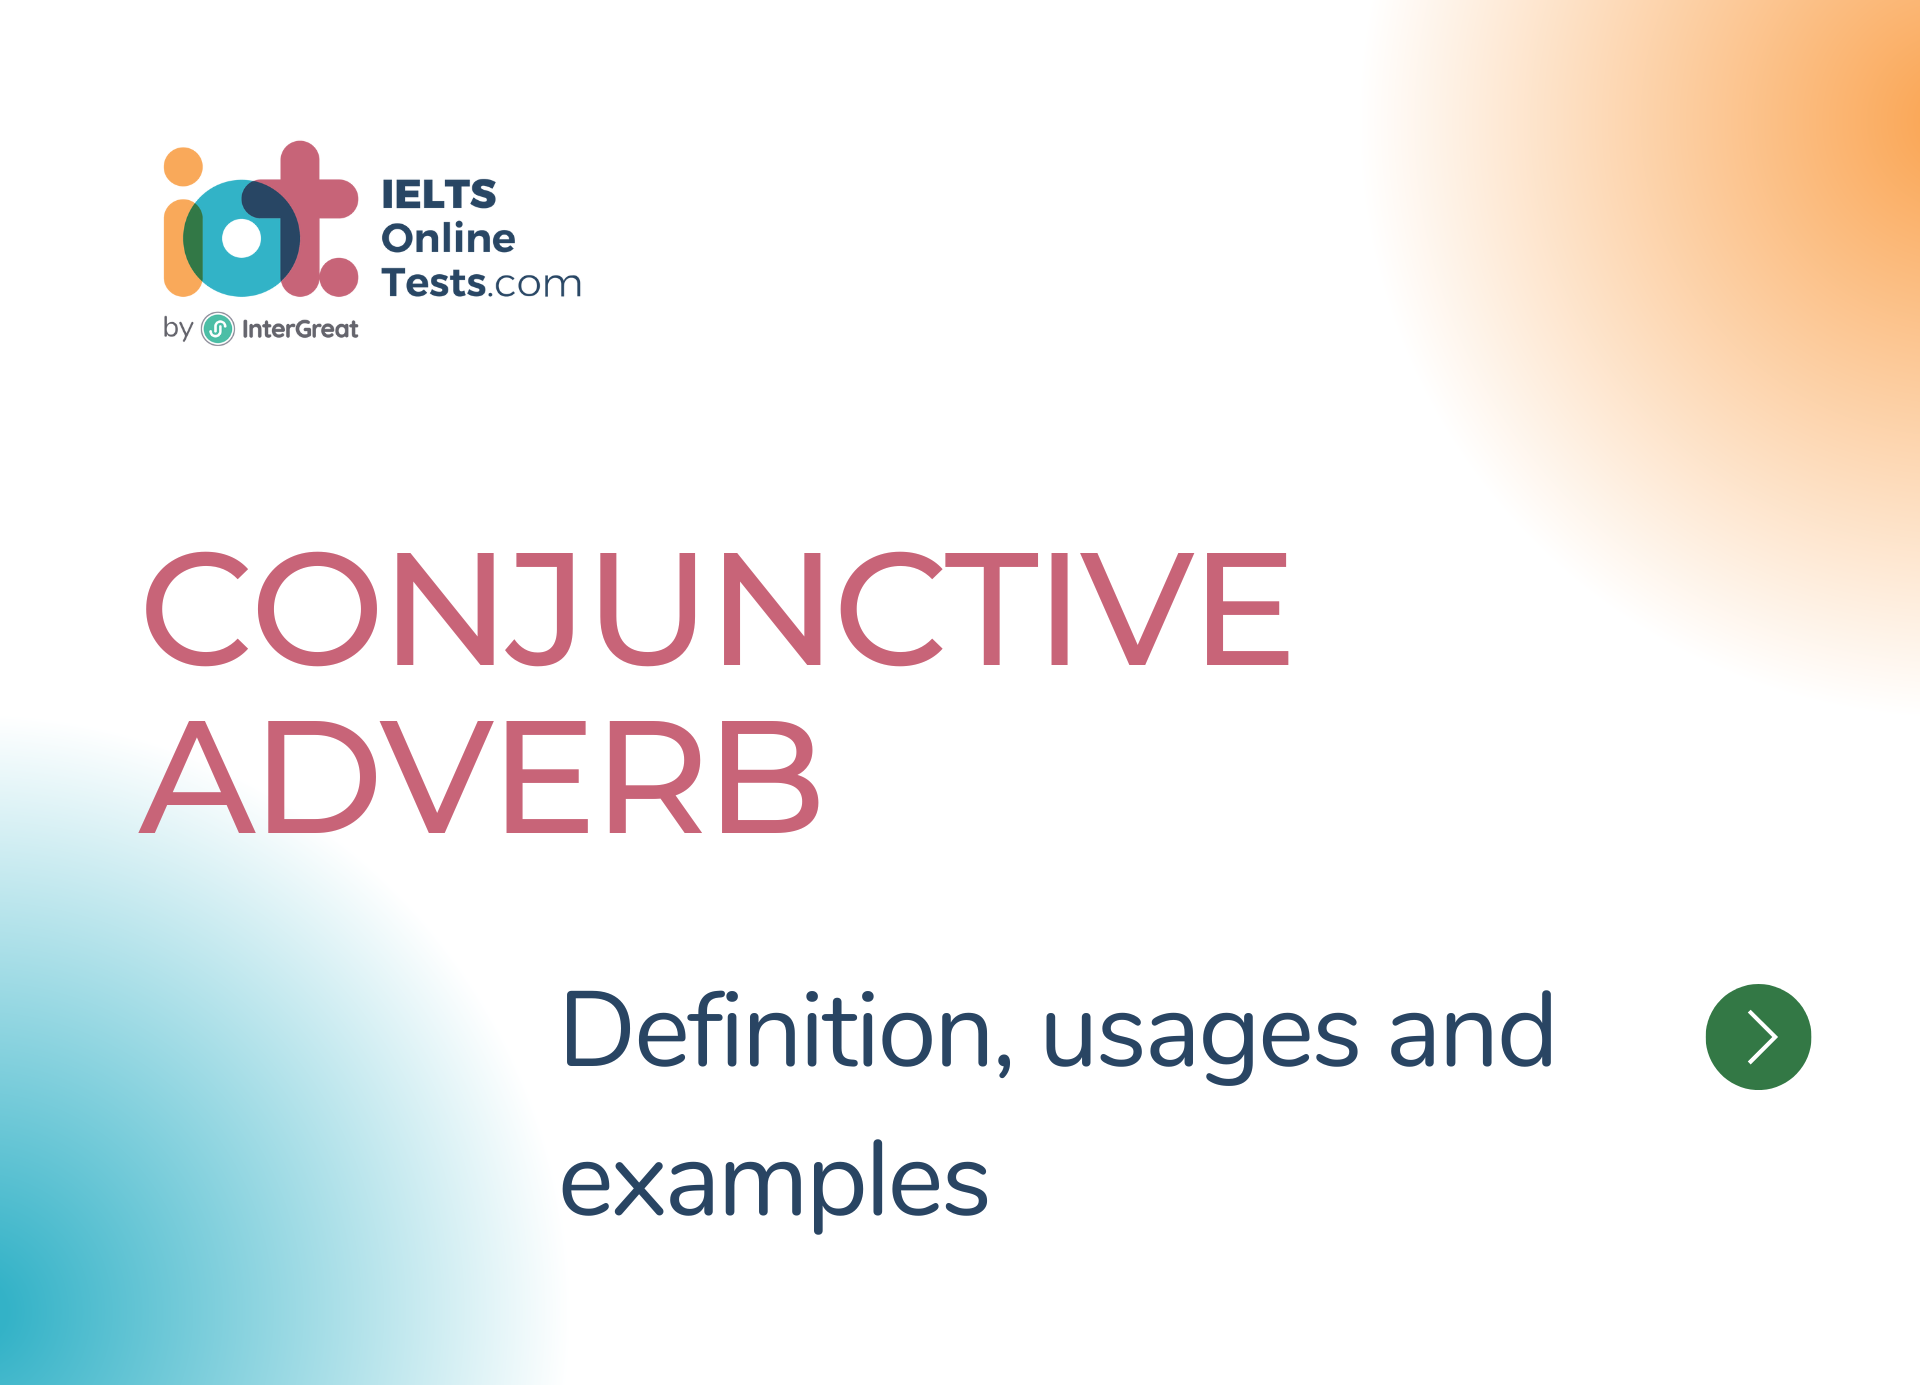 Conjunctive Adverb definition, usages and examples